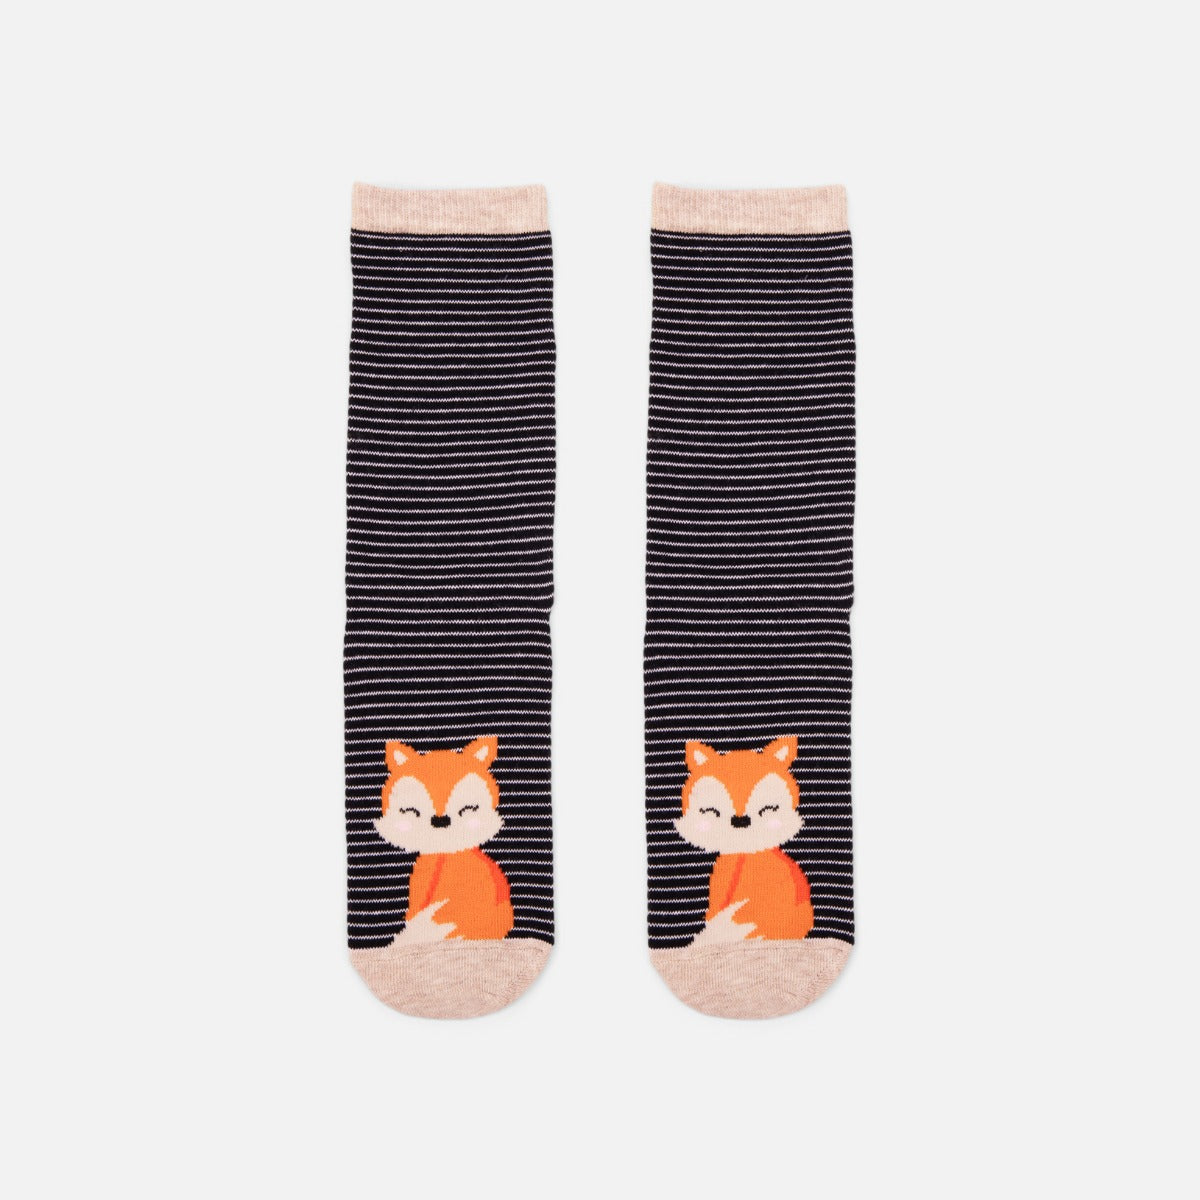 Navy blue and beige stripes socks with fox